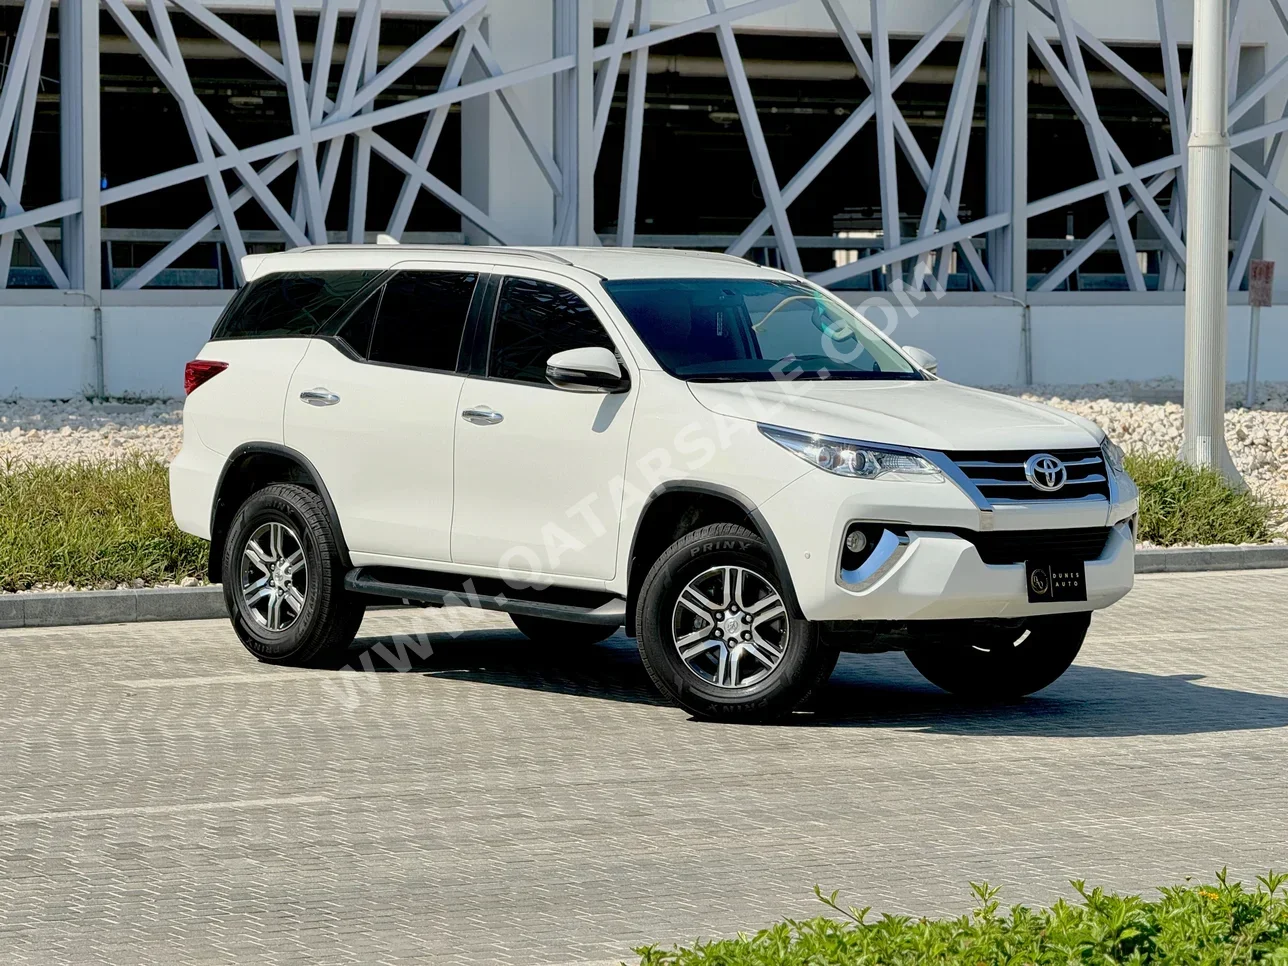 Toyota  Fortuner  2020  Automatic  51,990 Km  4 Cylinder  Four Wheel Drive (4WD)  SUV  White